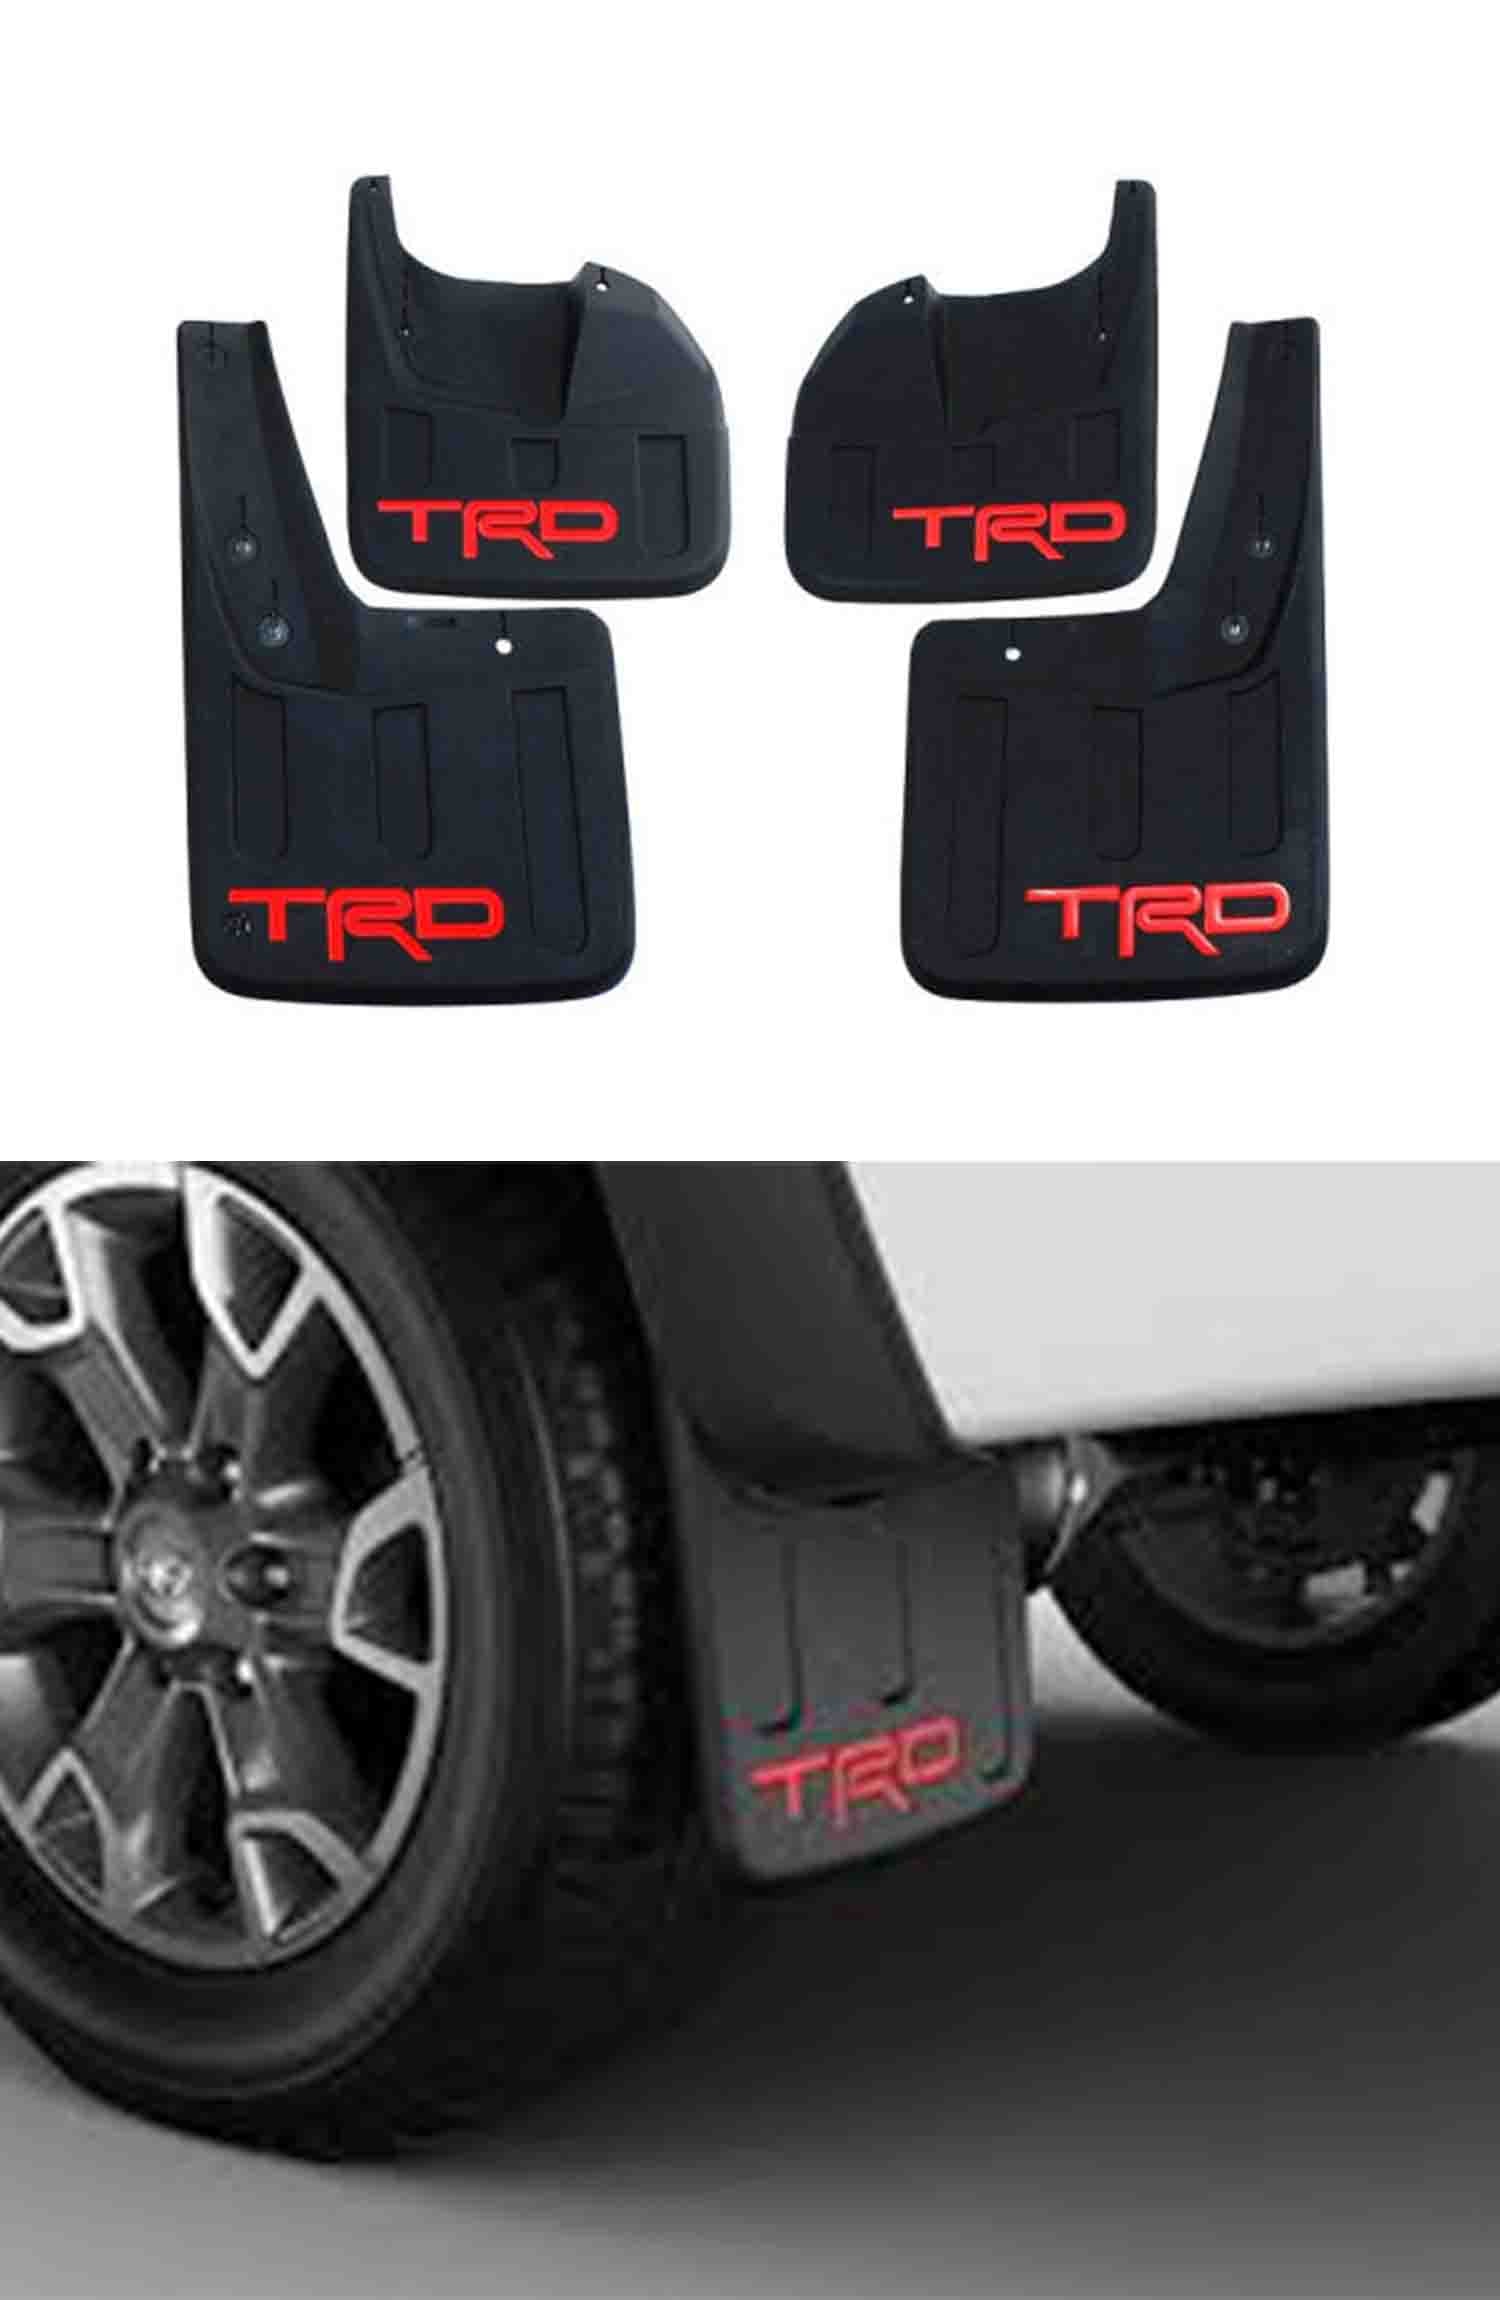 Toyota Hilux Revo TRD Mud Flap 2016-2022Toyota Hilux Revo TRD Mud Flaps 4pcsToyota Hilux Vigo Mud GuardsToyota Hilux Revo Mud Flaps 2016-2021Mud Guards Mud Flaps Front + Rear (Red TRD) V3Trd Style Accessories Mudguard Suit Toyota Hilux Revo